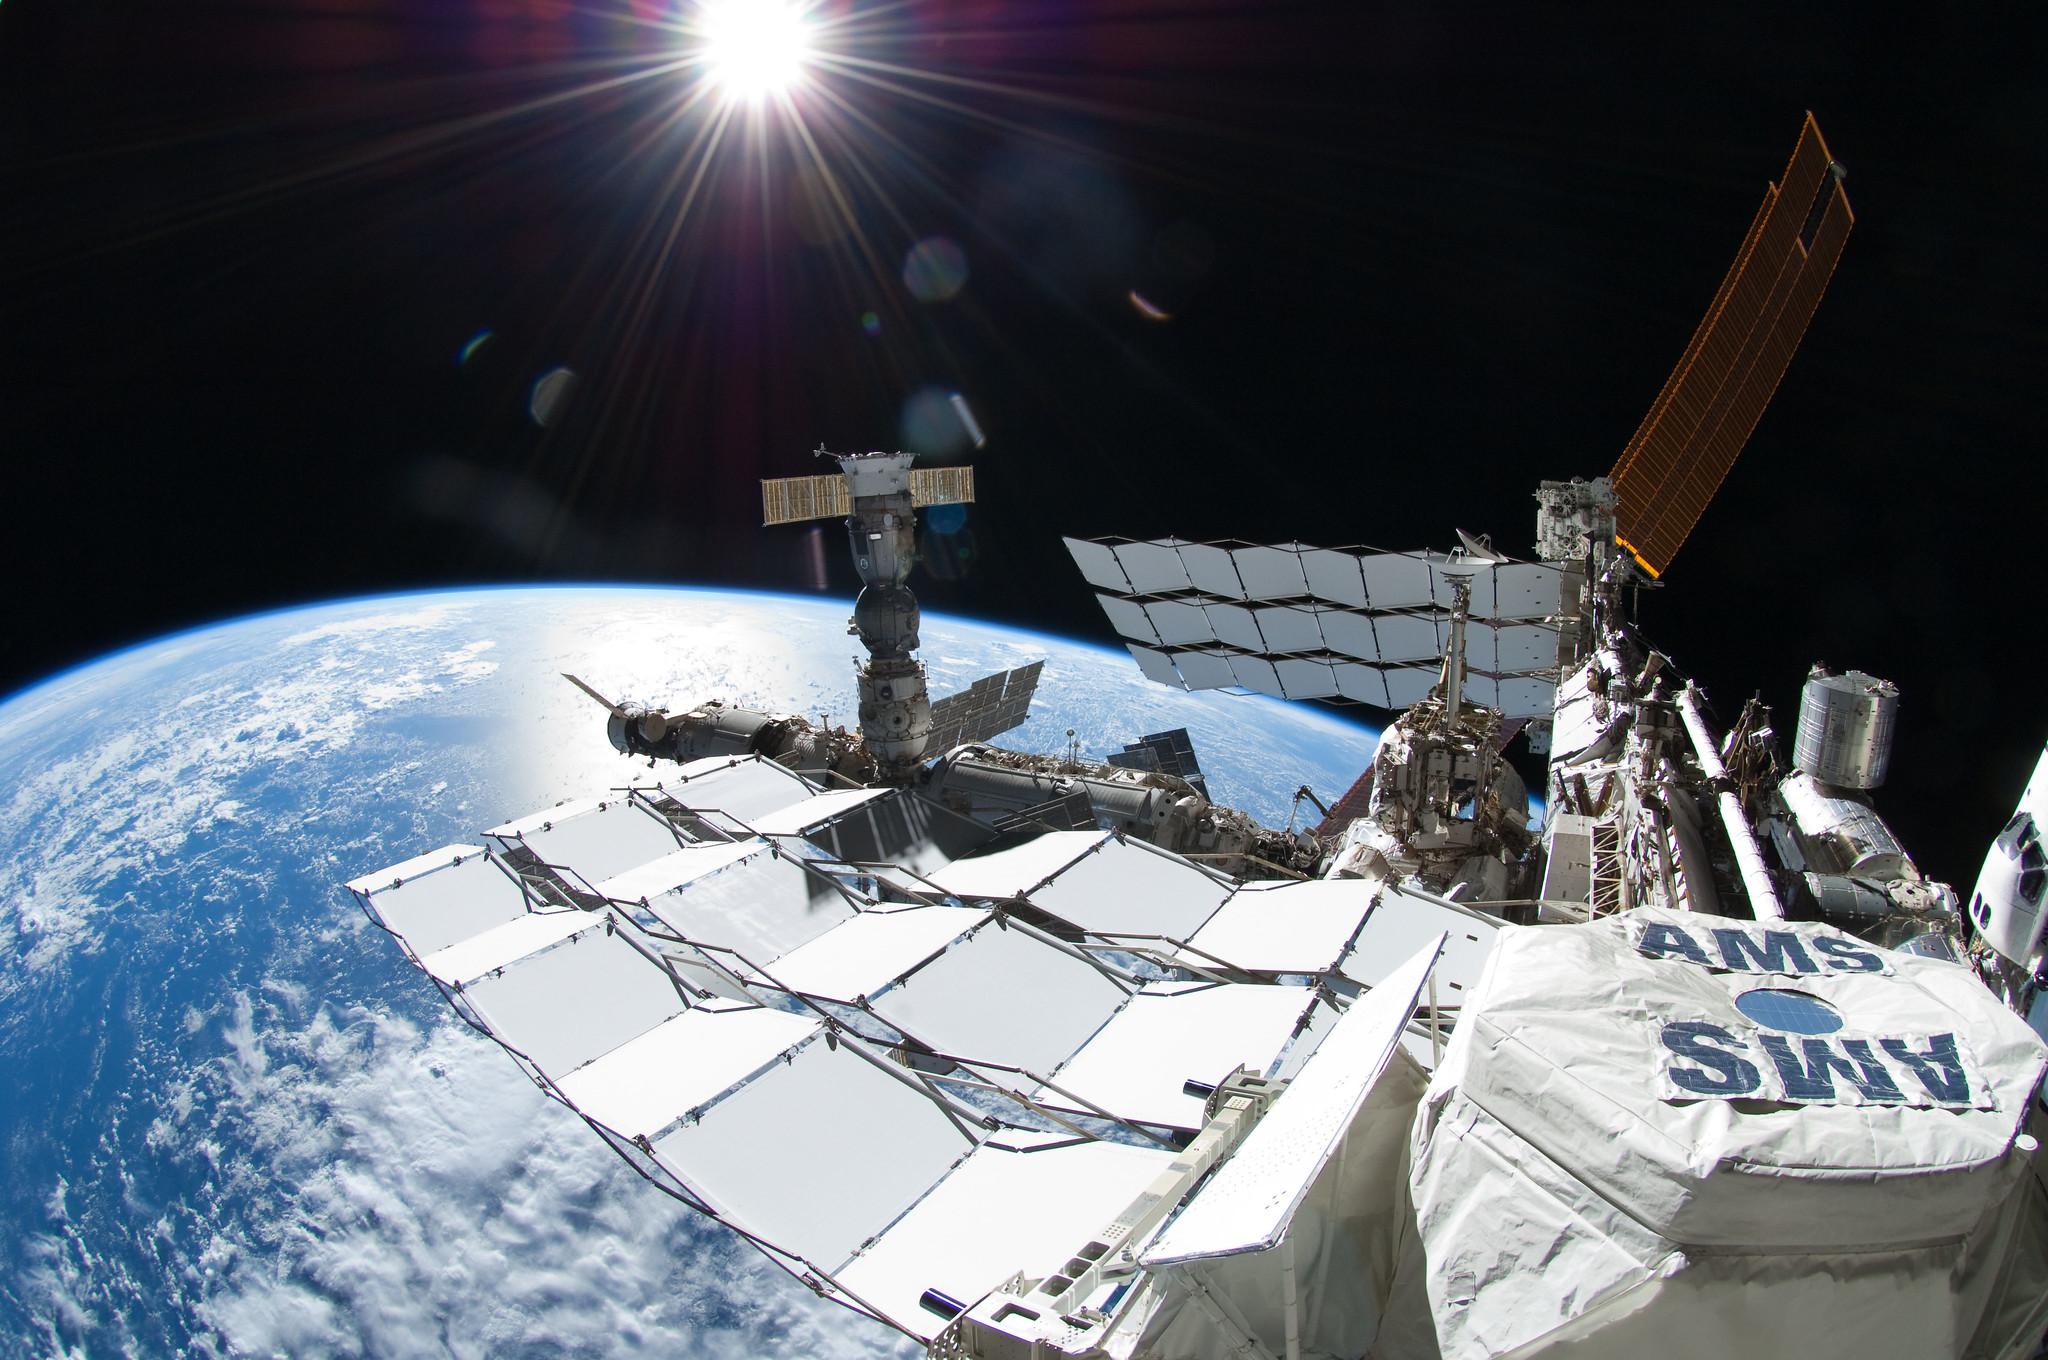 image of instrument, space station exterior and Earth